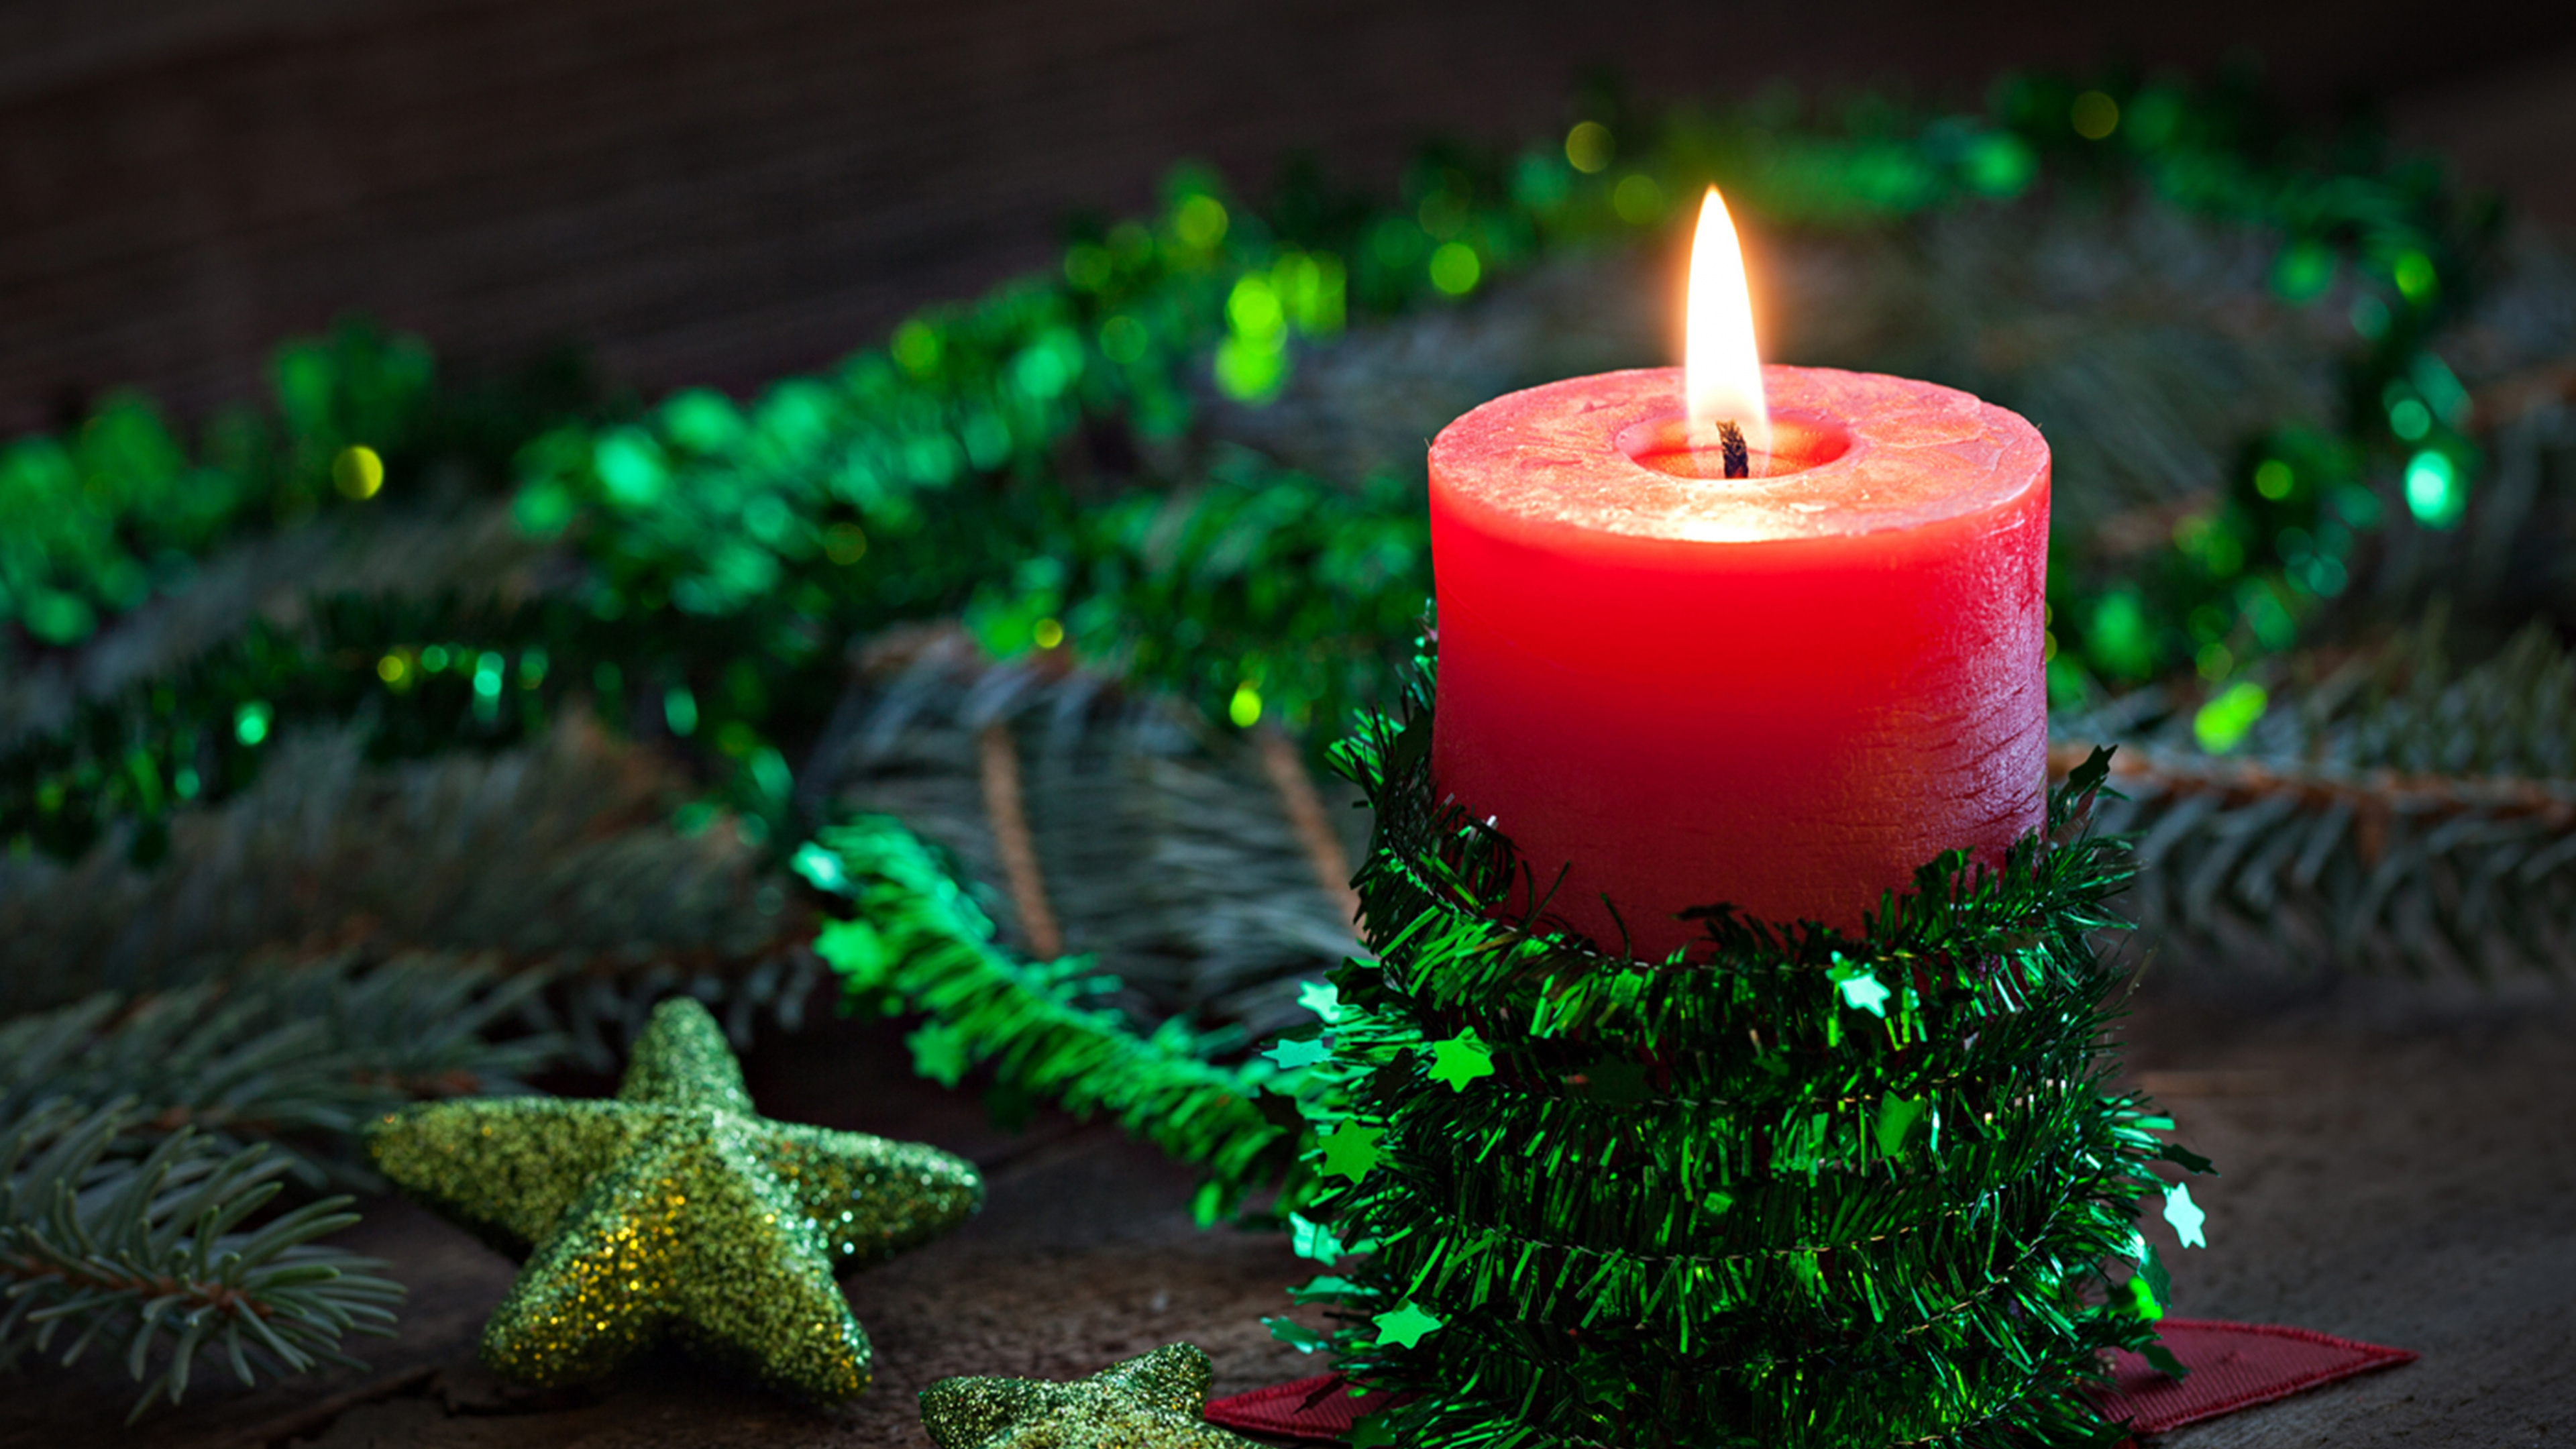 Candle, Green, Lighting, Christmas, Tree. Wallpaper in 3840x2160 Resolution